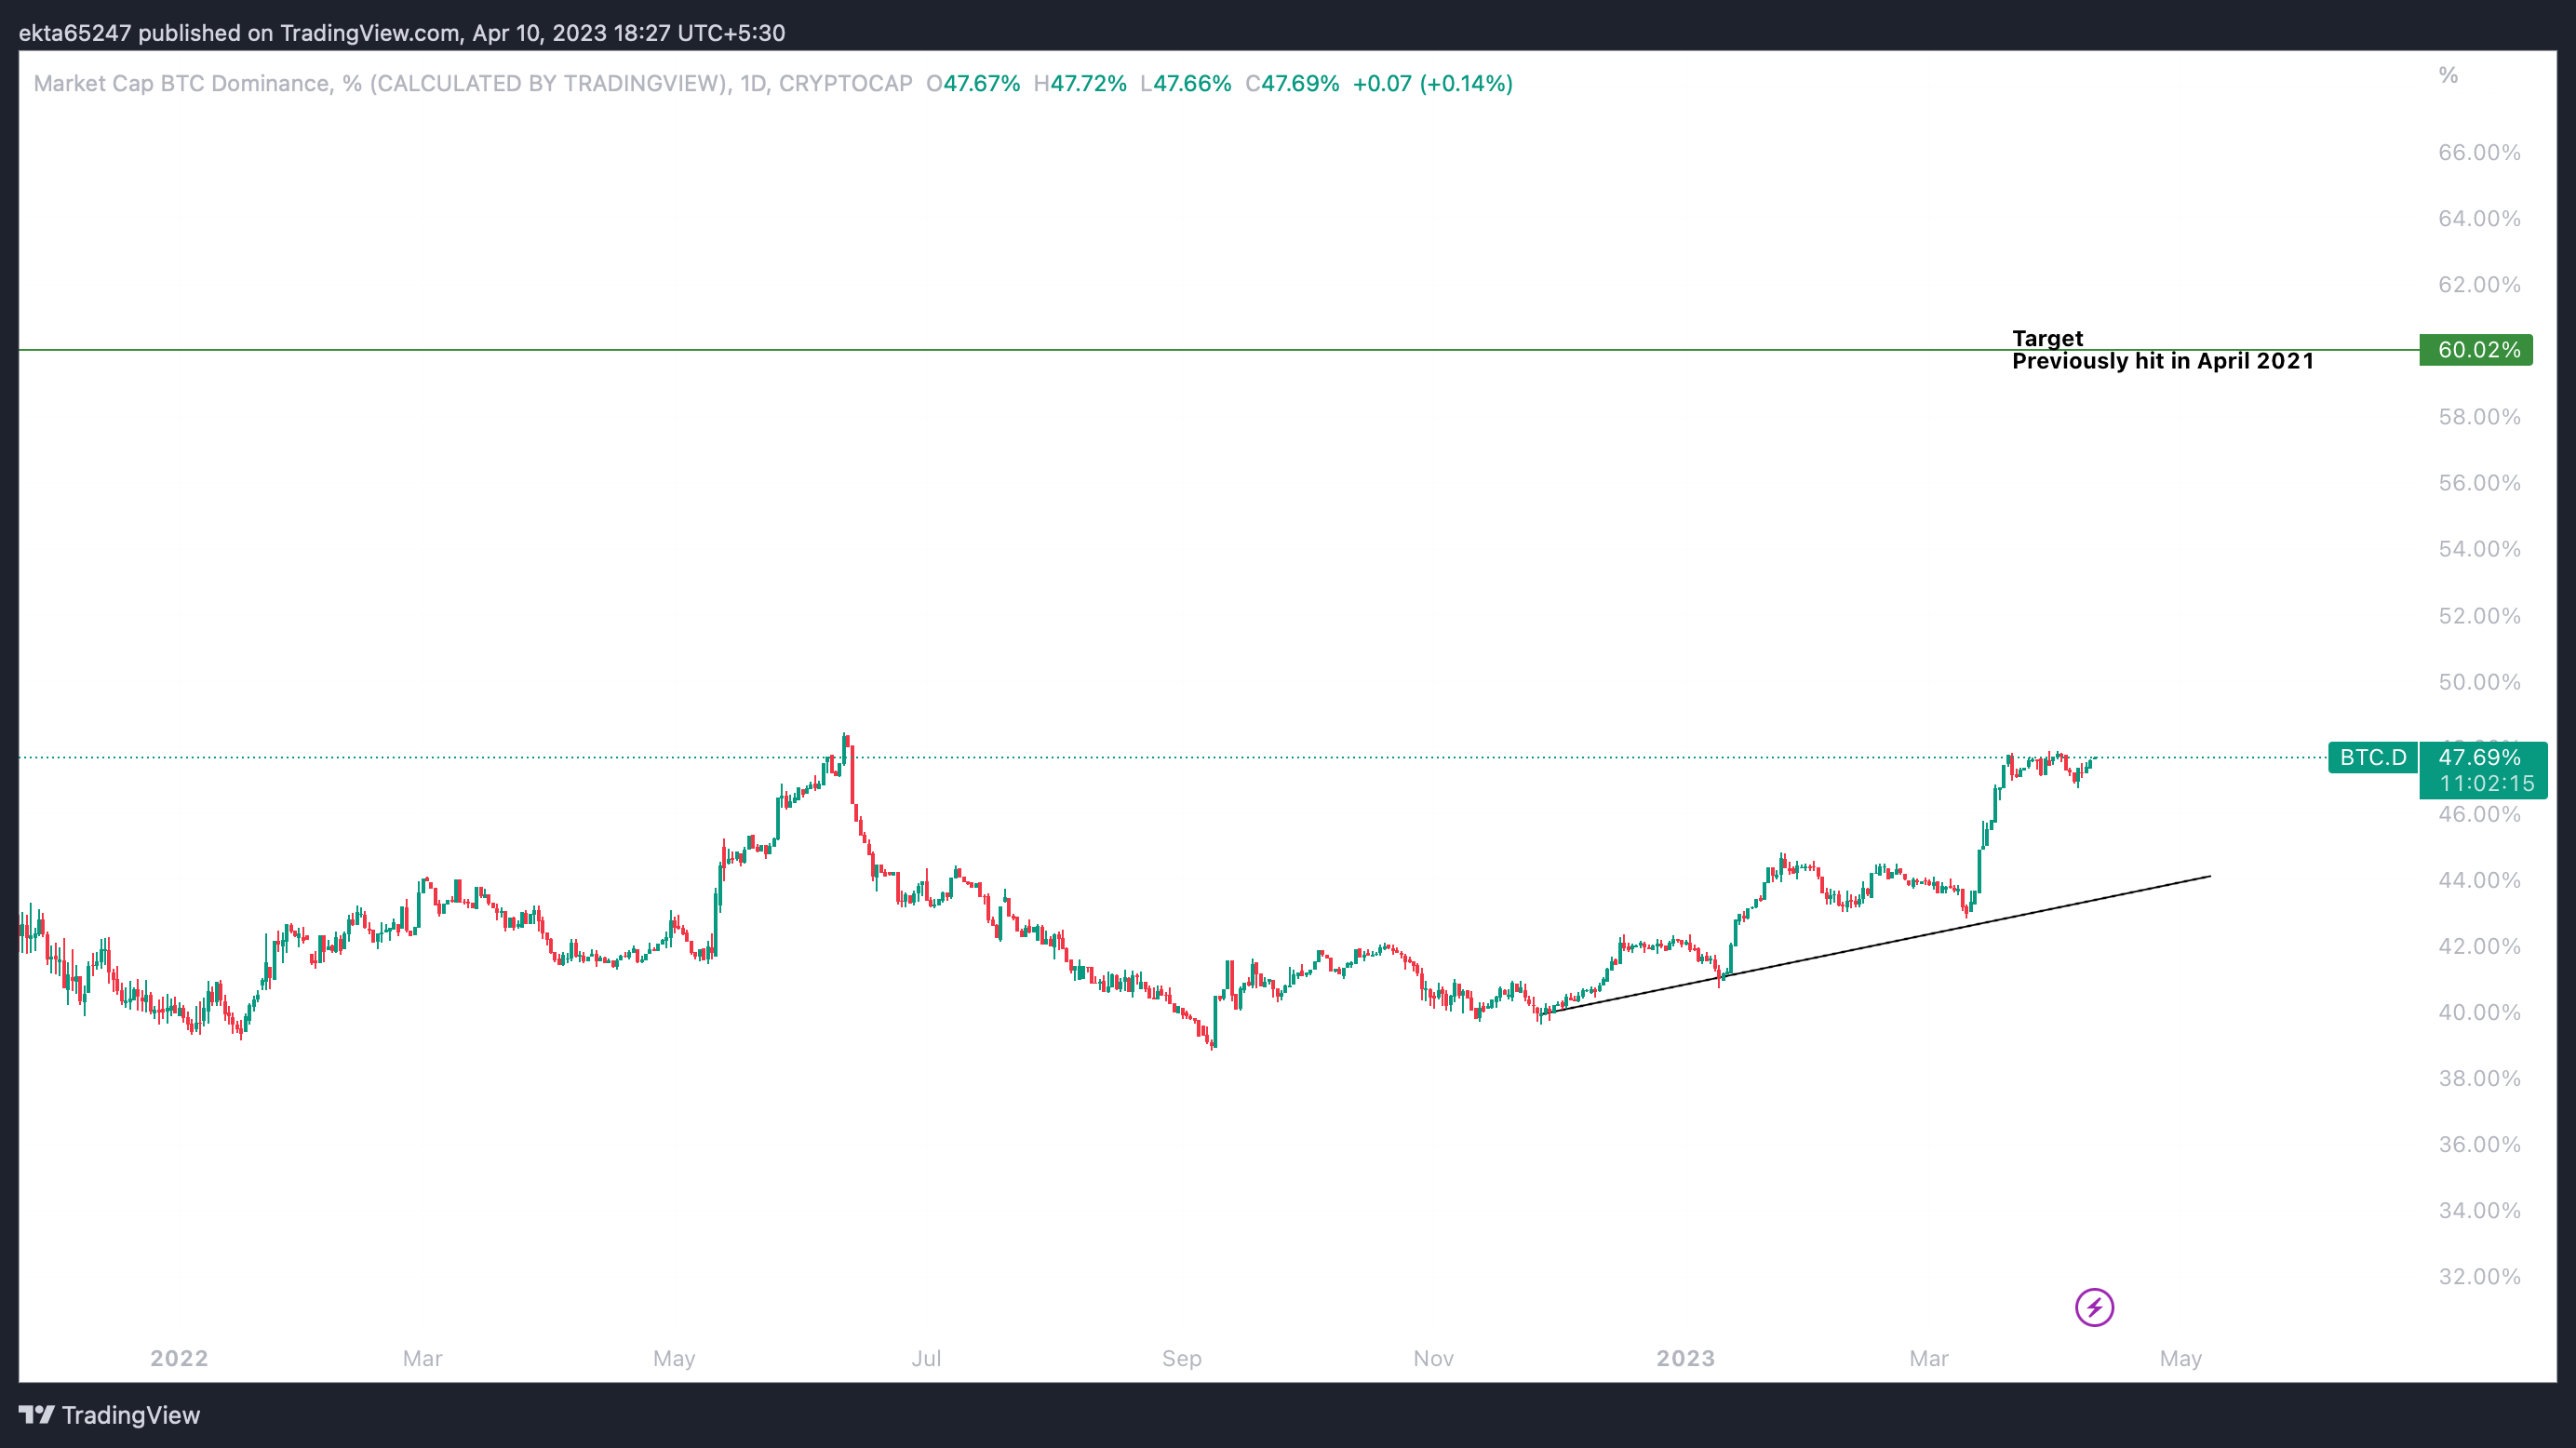 BTC dominance and the target of 60%